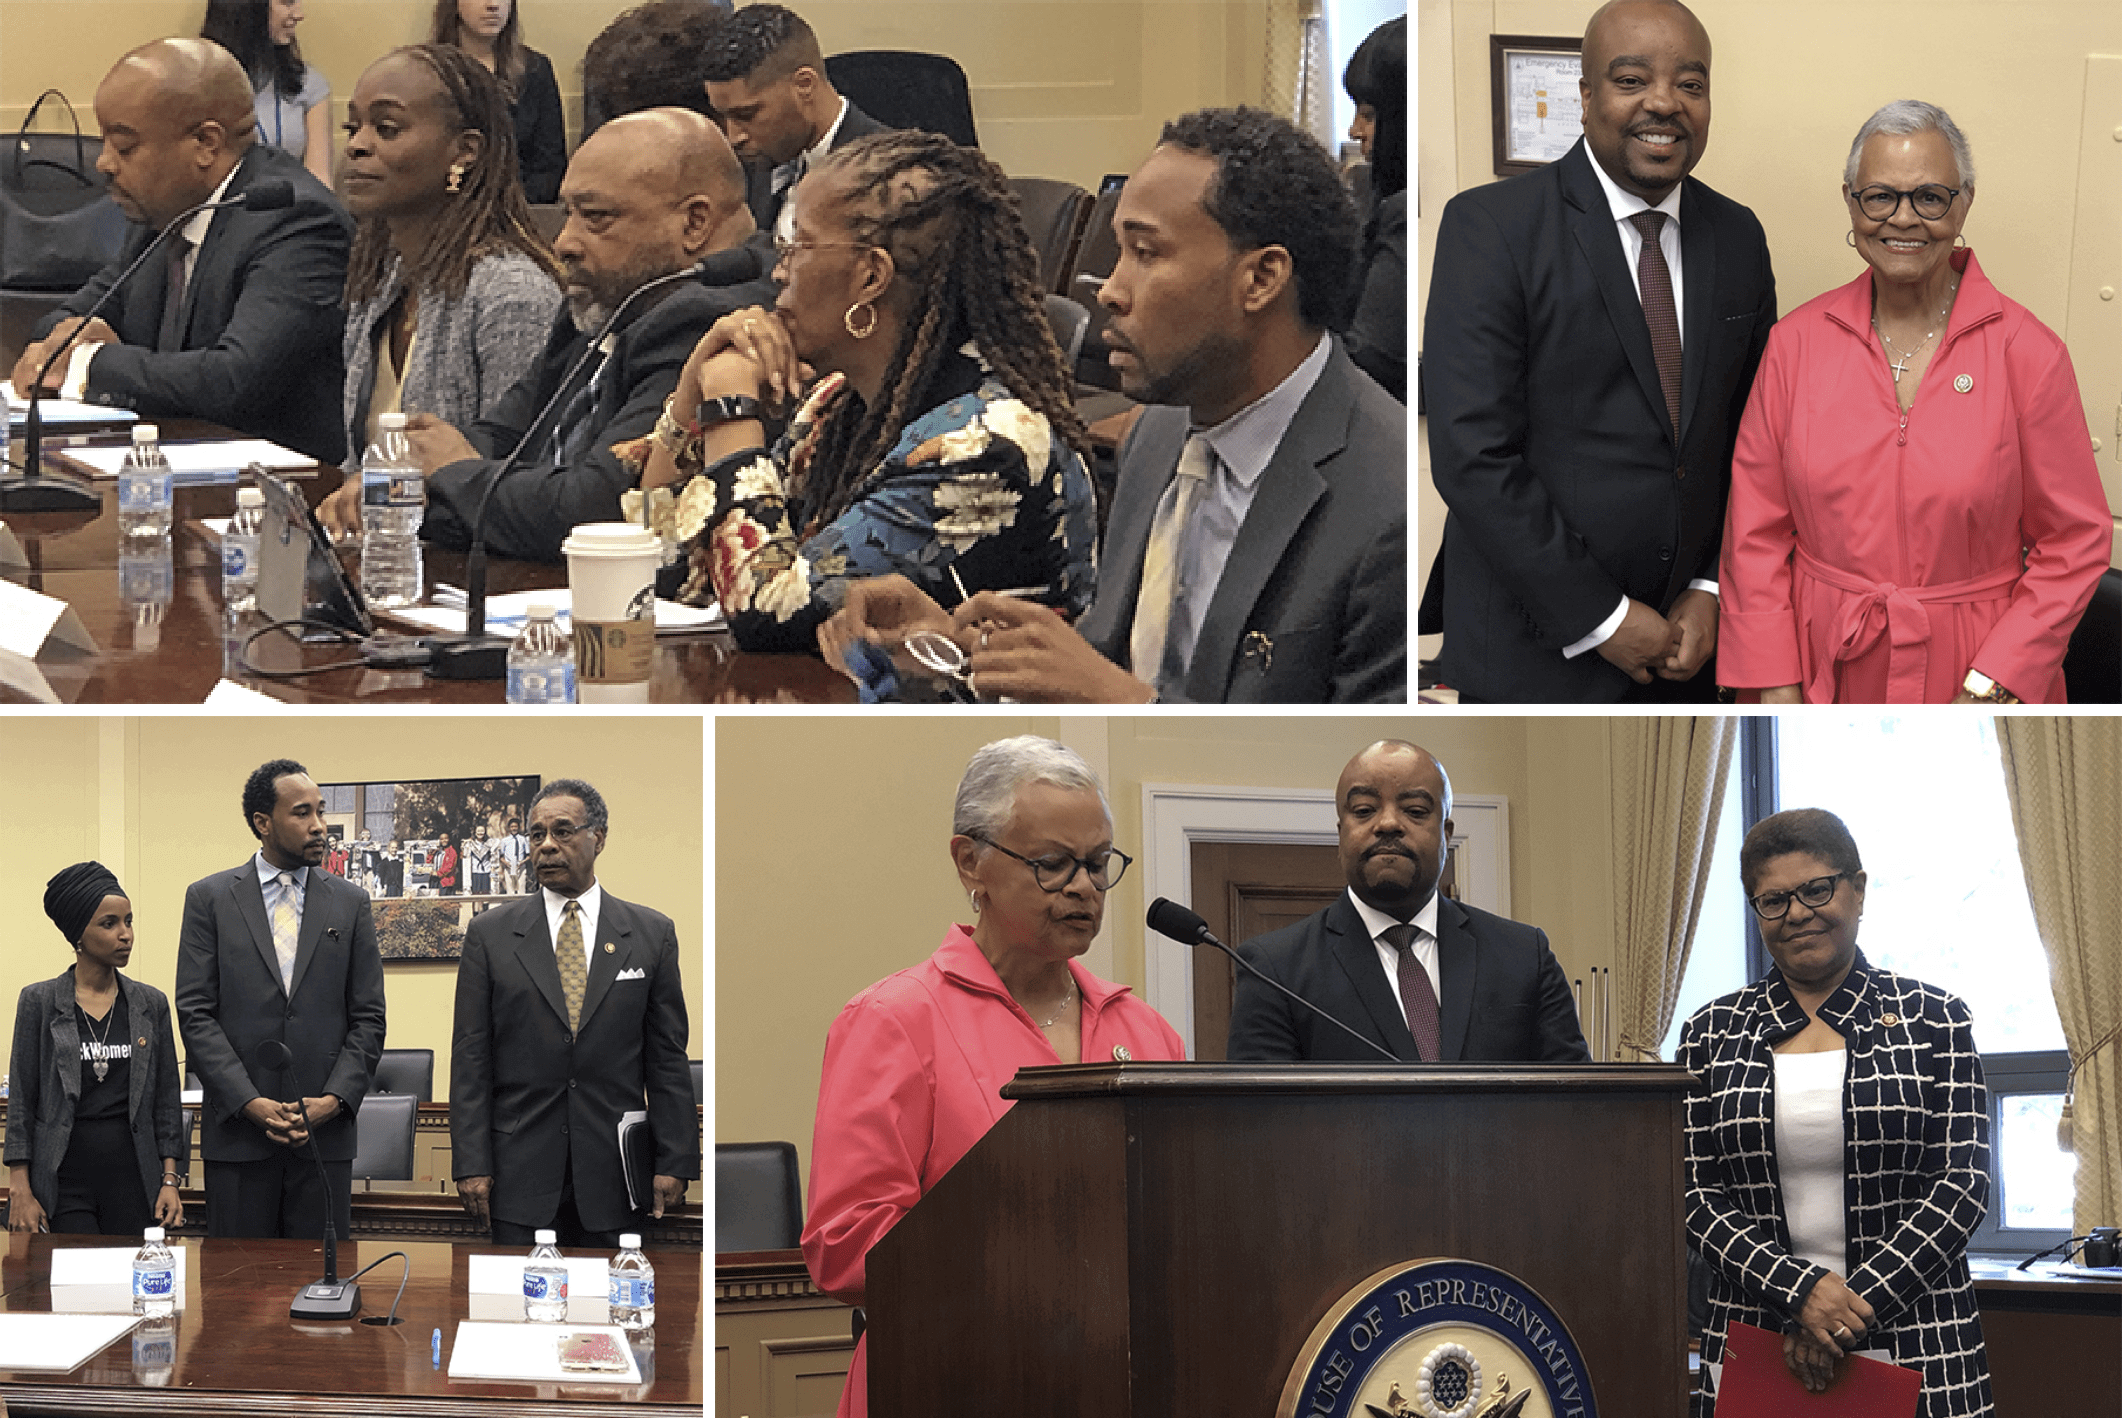 Photos of the Taskforce supporting experts and of Congresswoman Bonnie Watson Coleman speaking